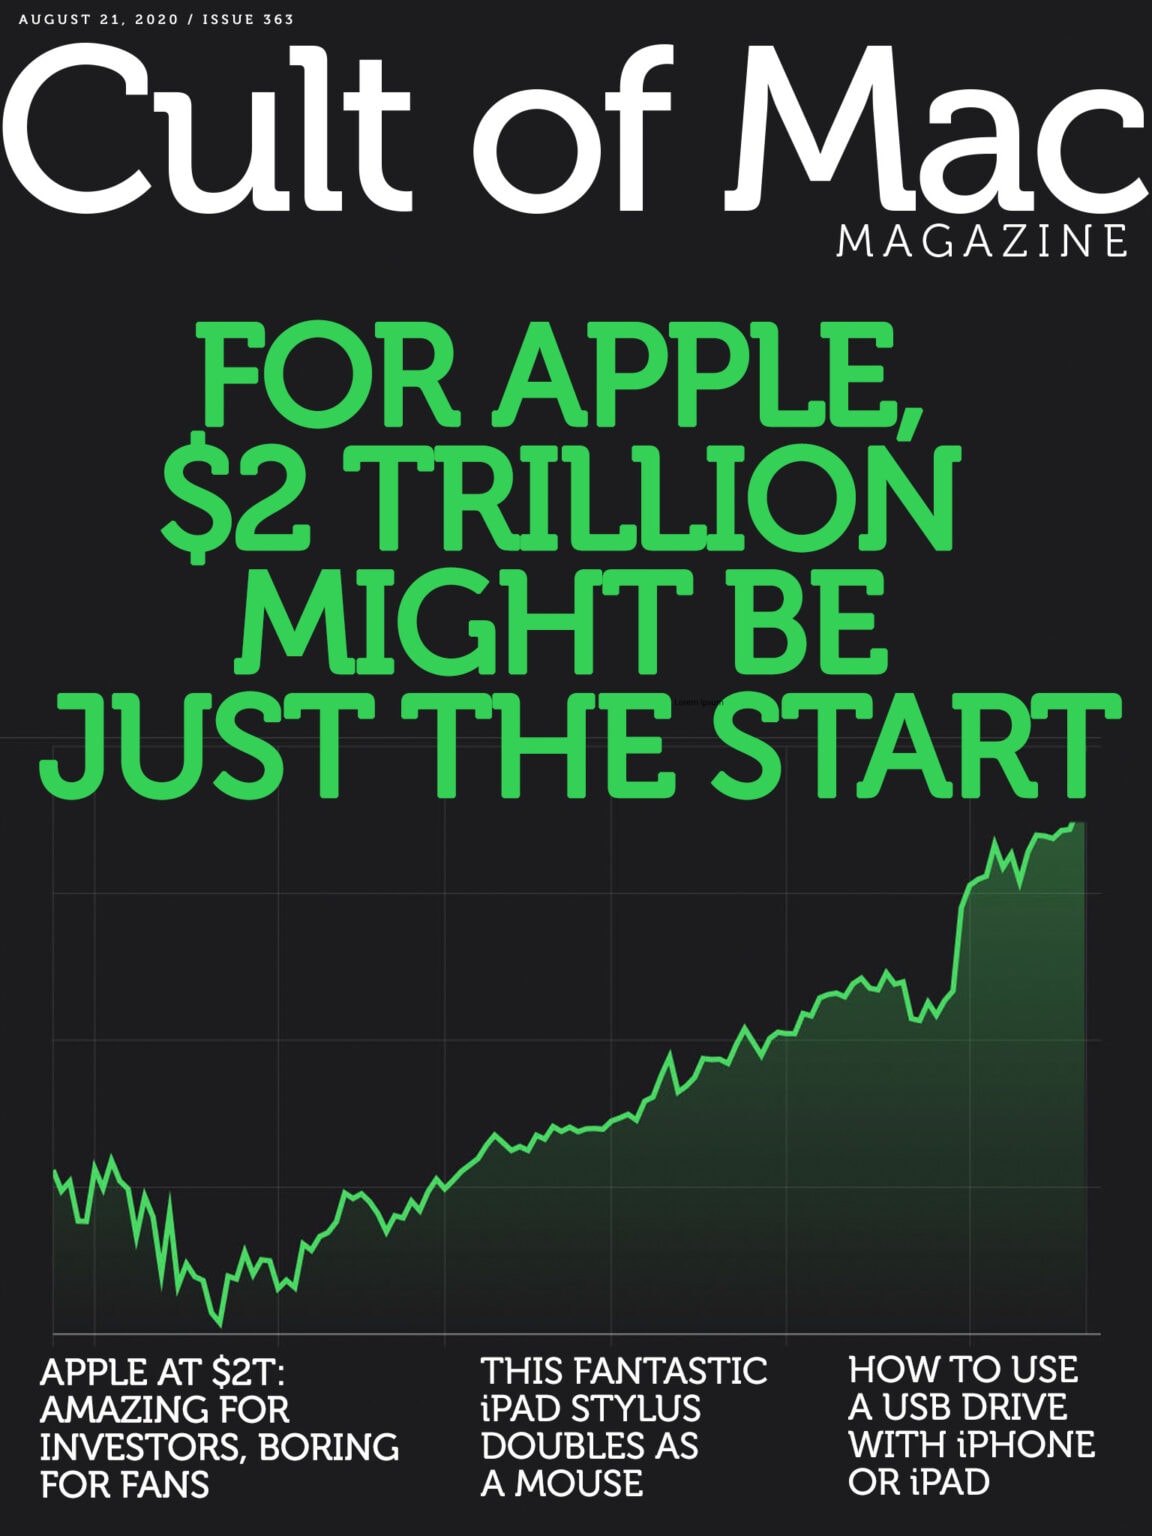 Apple hits $2 trillion market cap and doesn't look back.